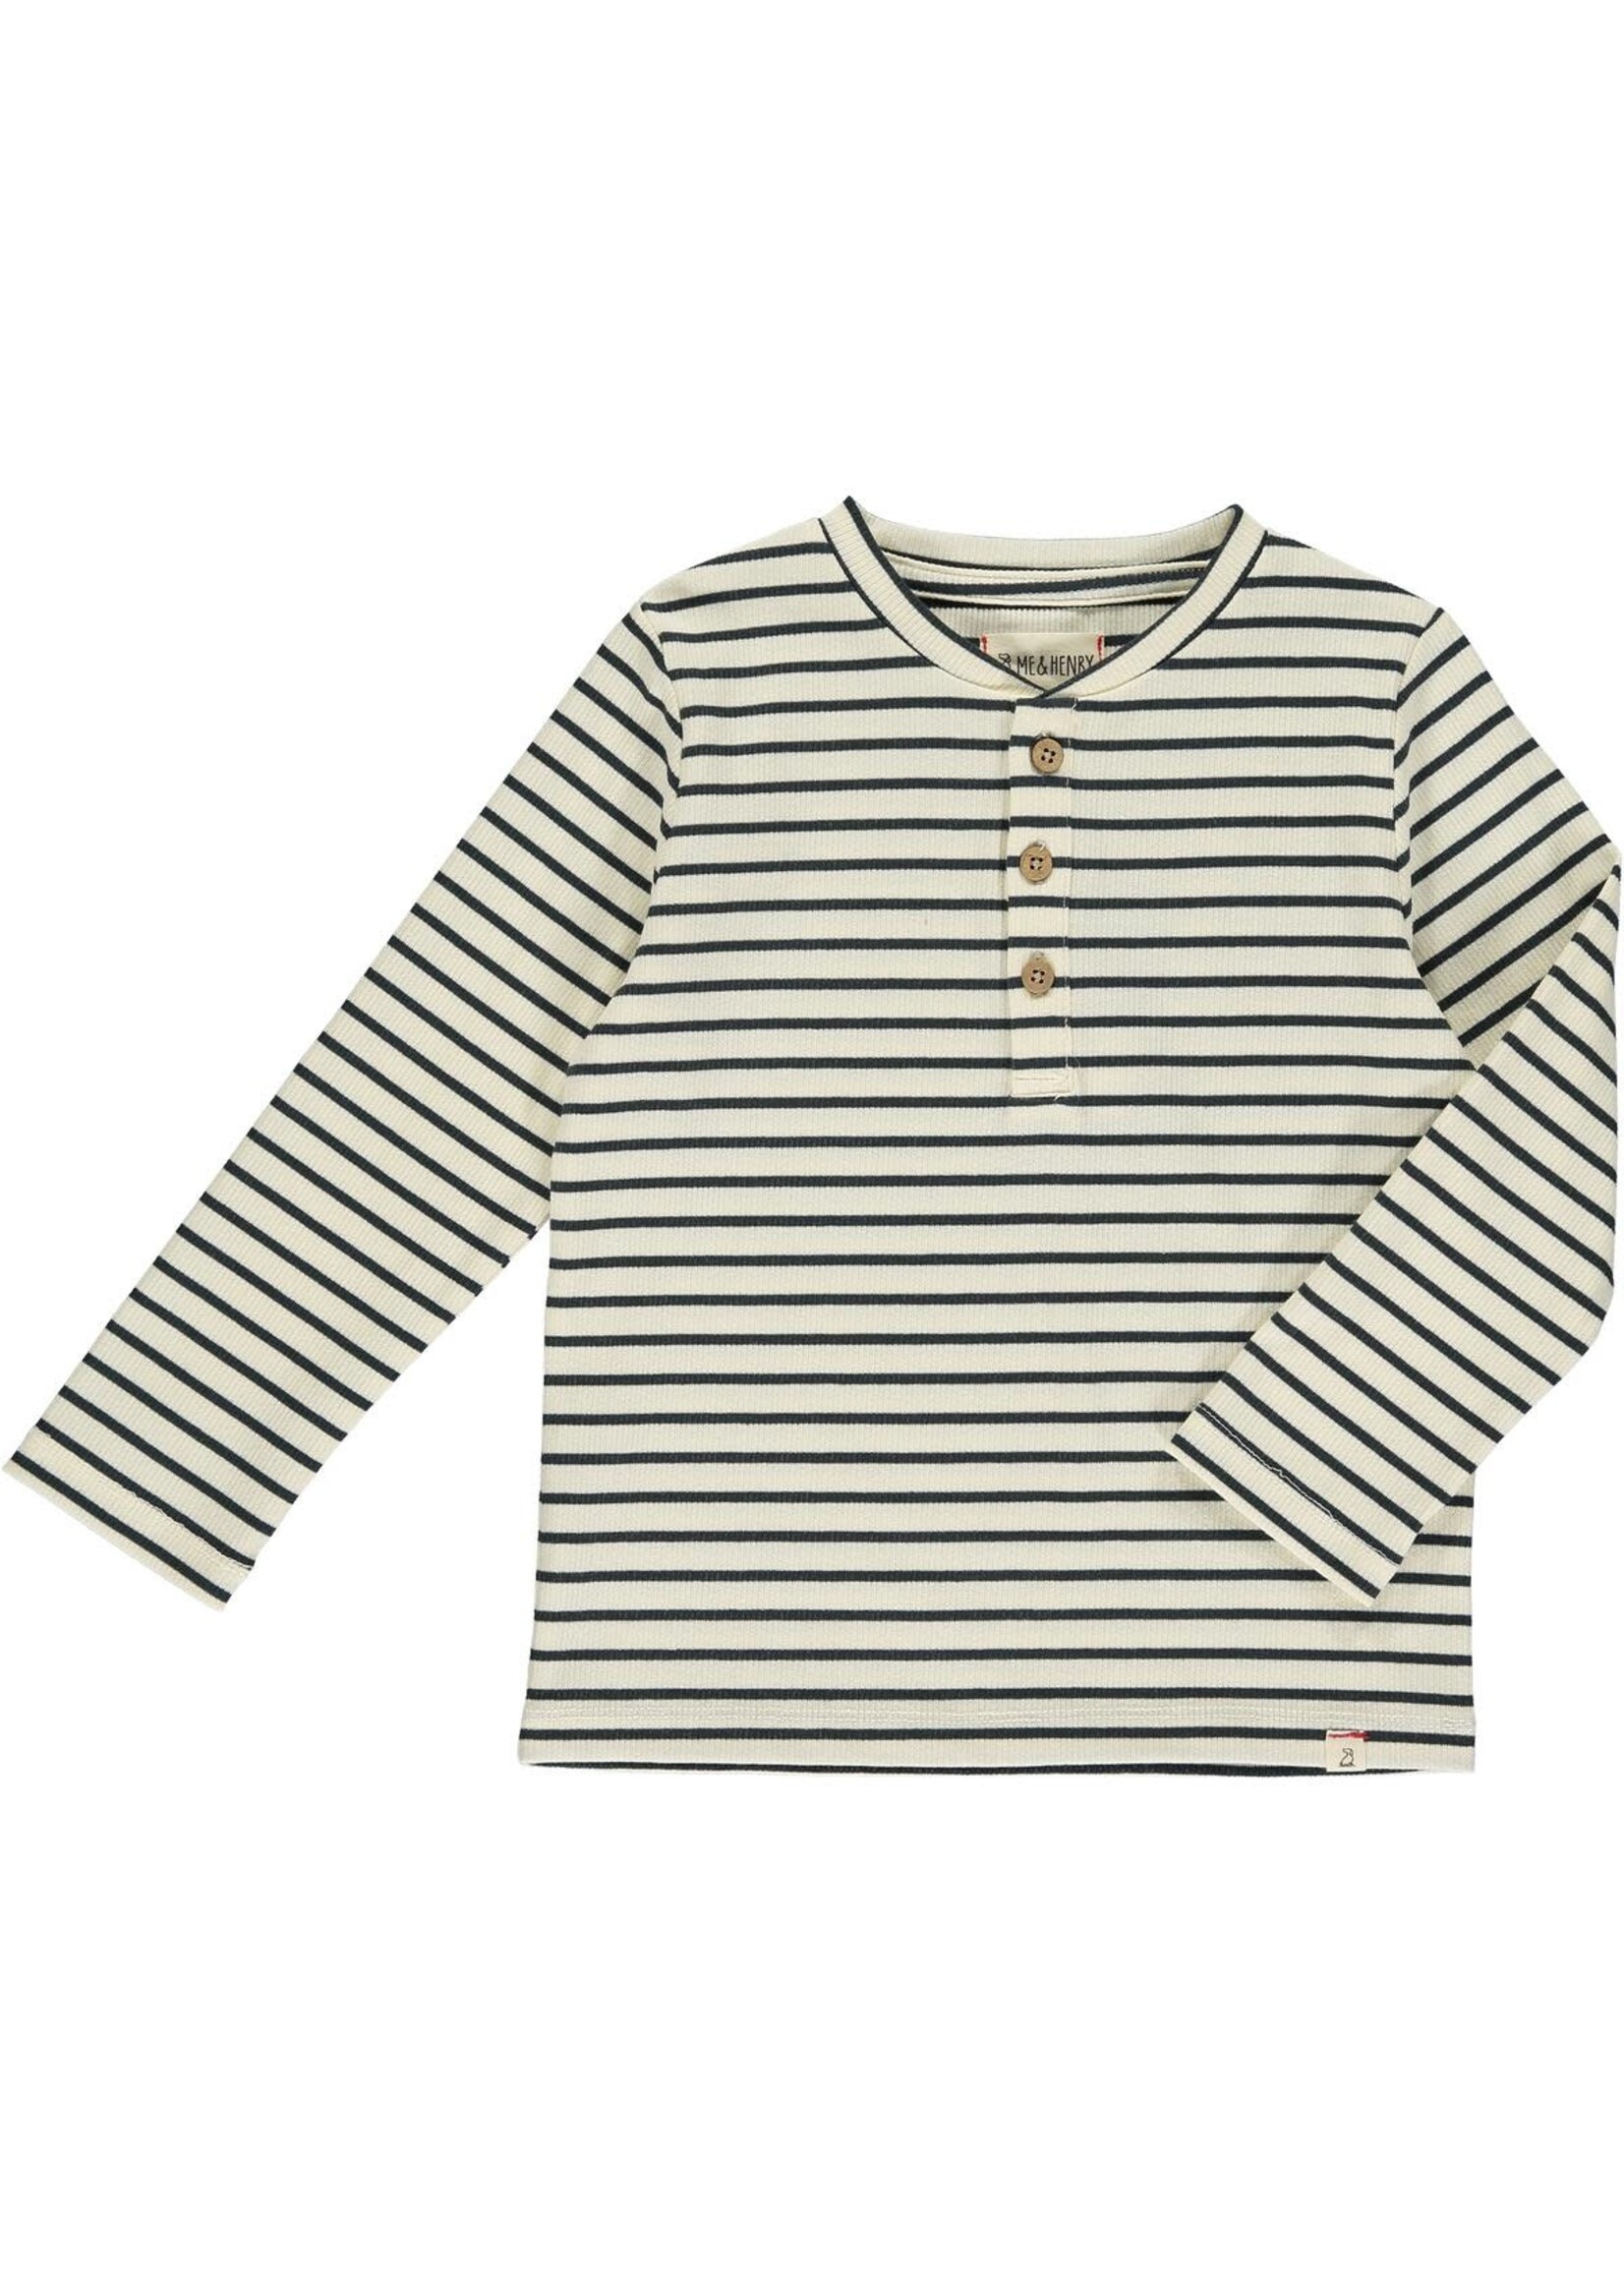 Me & Henry Adams Ribbed Henley Cream/Charcoal Stripe